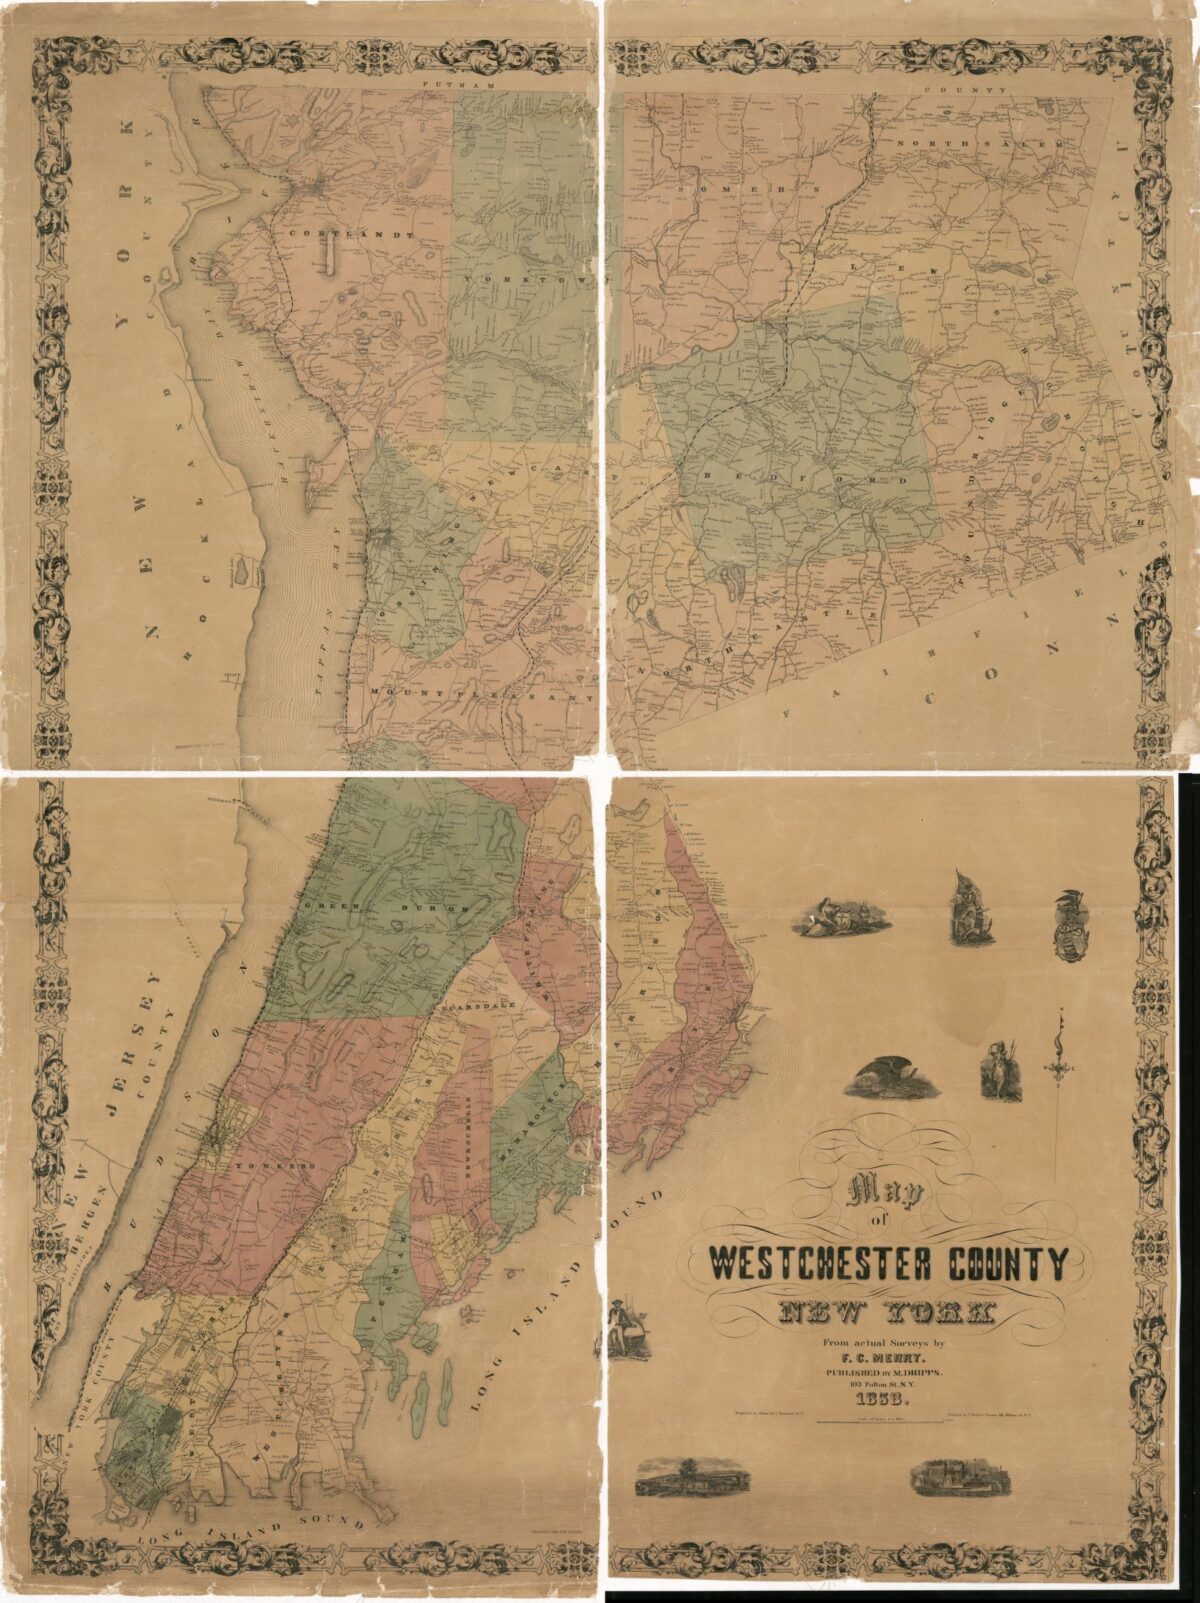 A map of Westchester with counties in different colors. Includes property owners names.